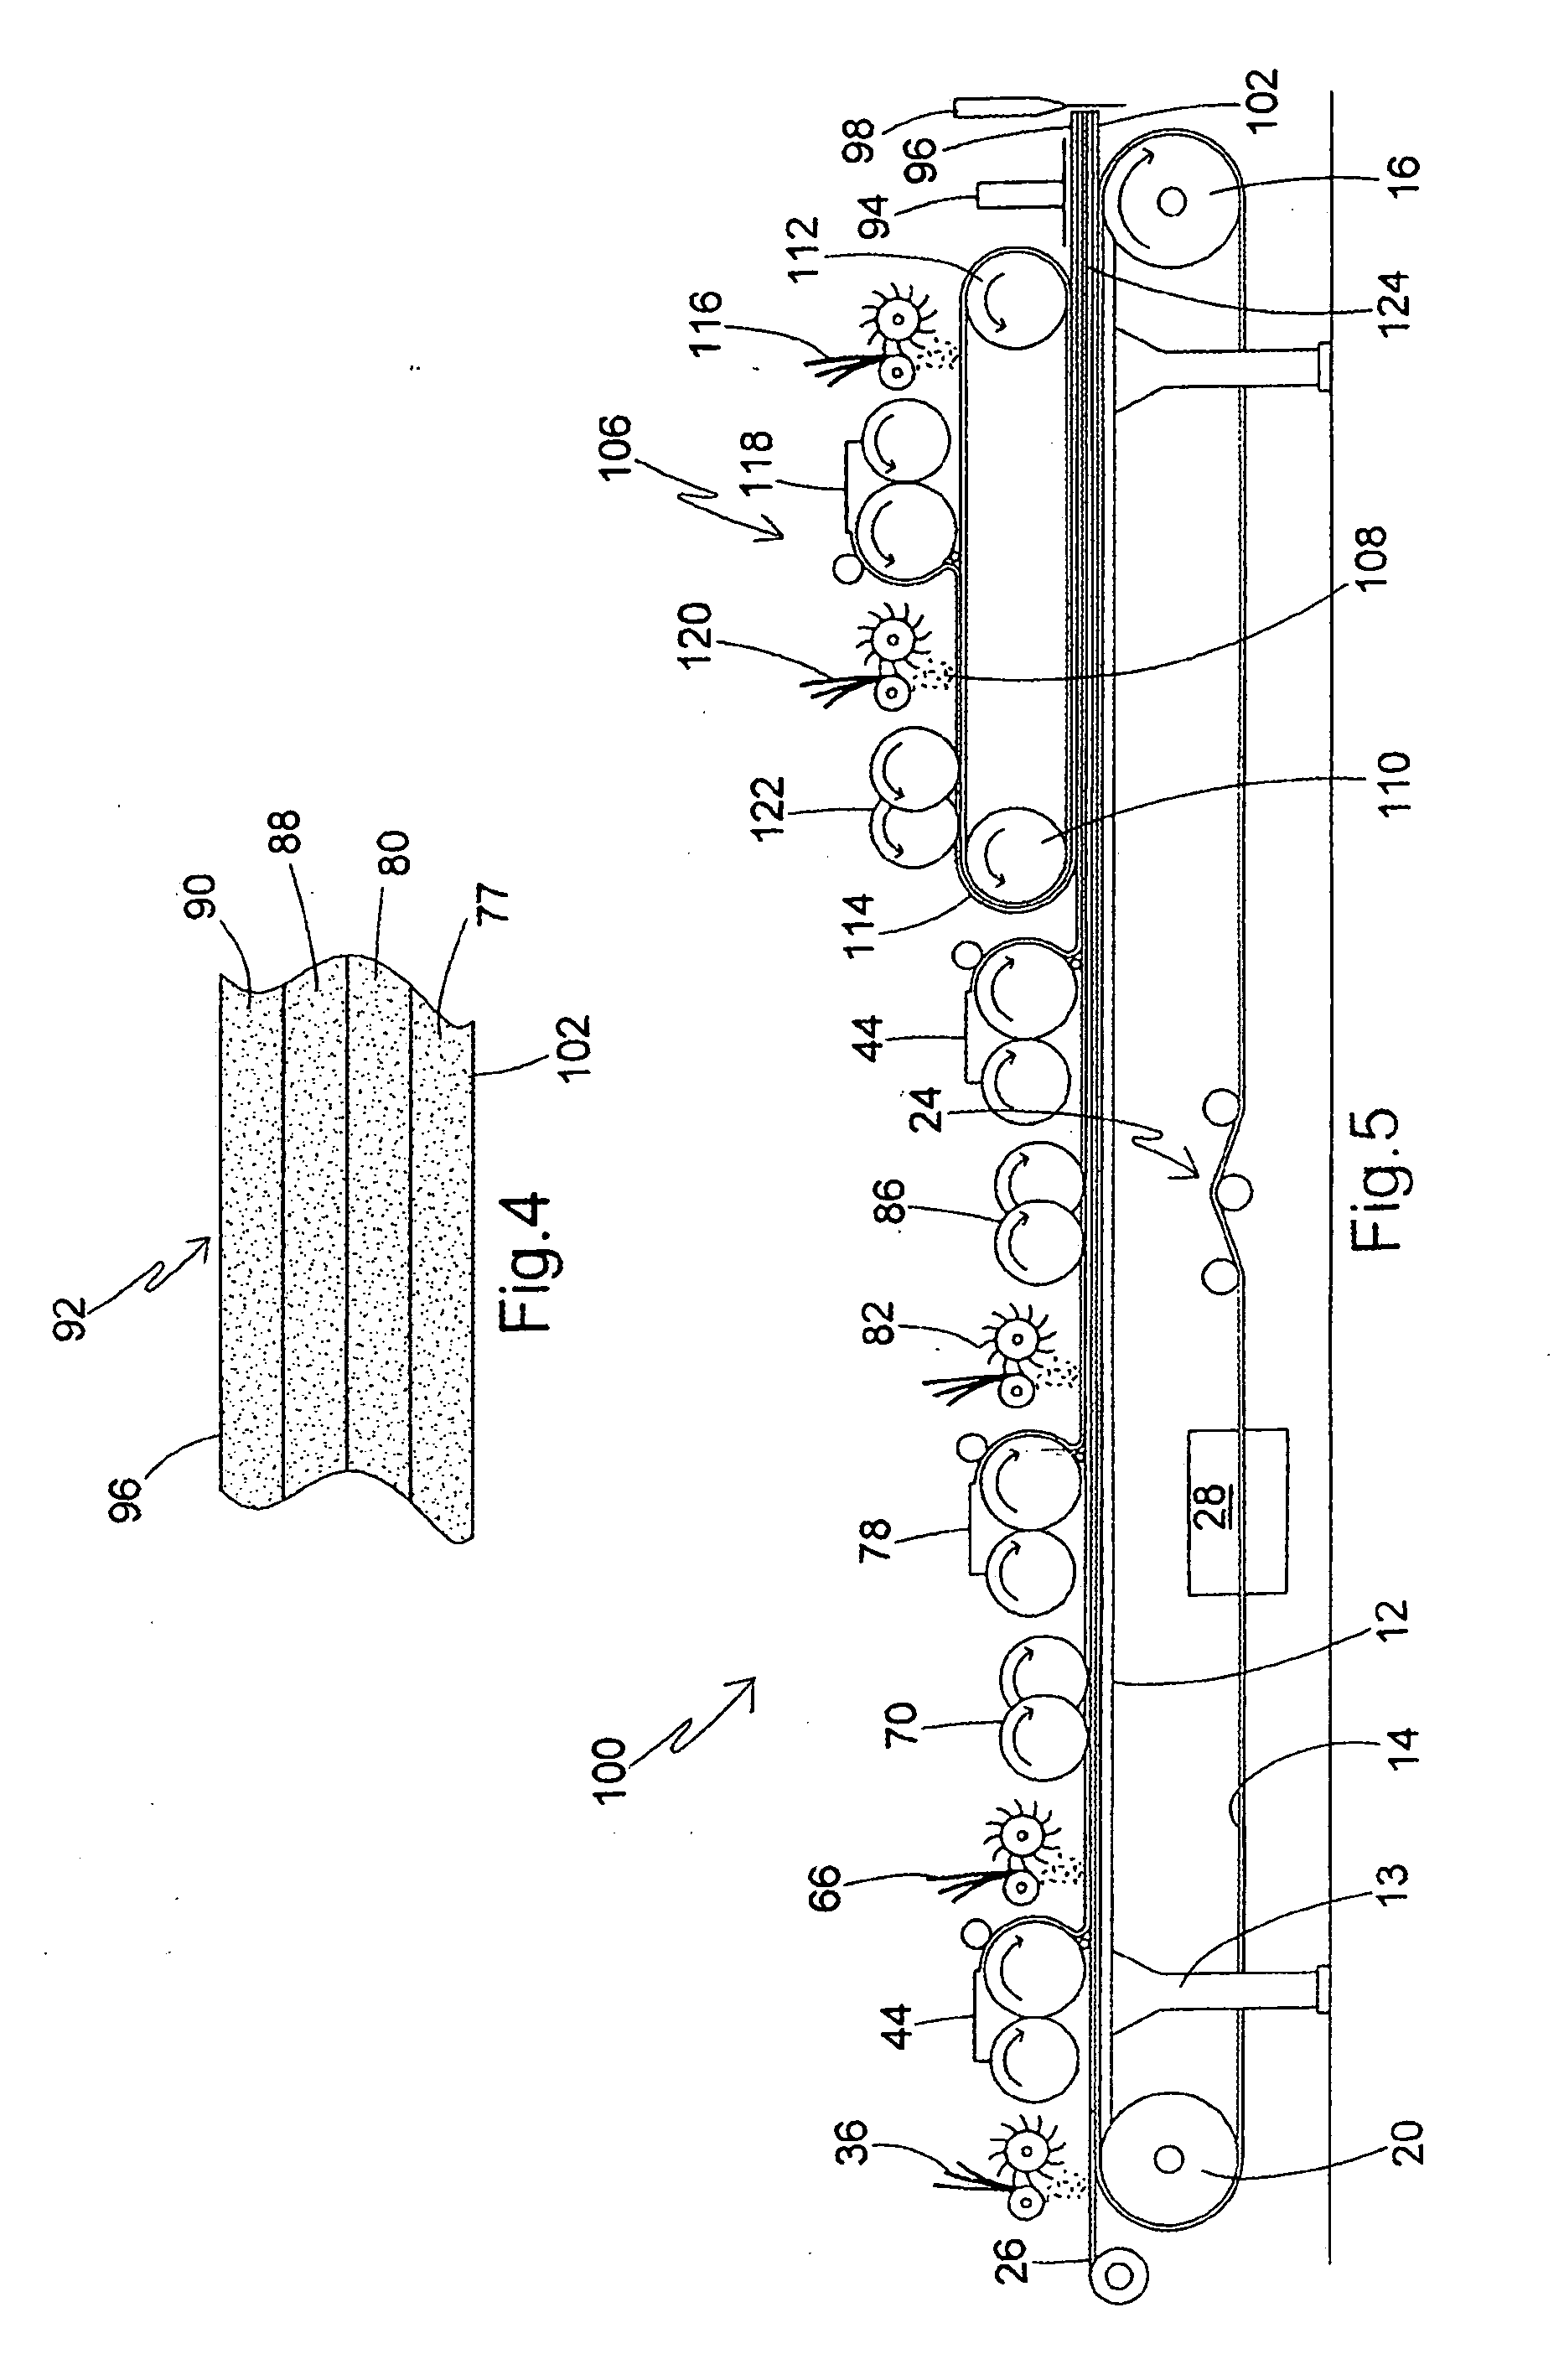 Multi-layer process and apparatus for producing high strength fiber-reinforced structural cementitious panels with enhanced fiber content